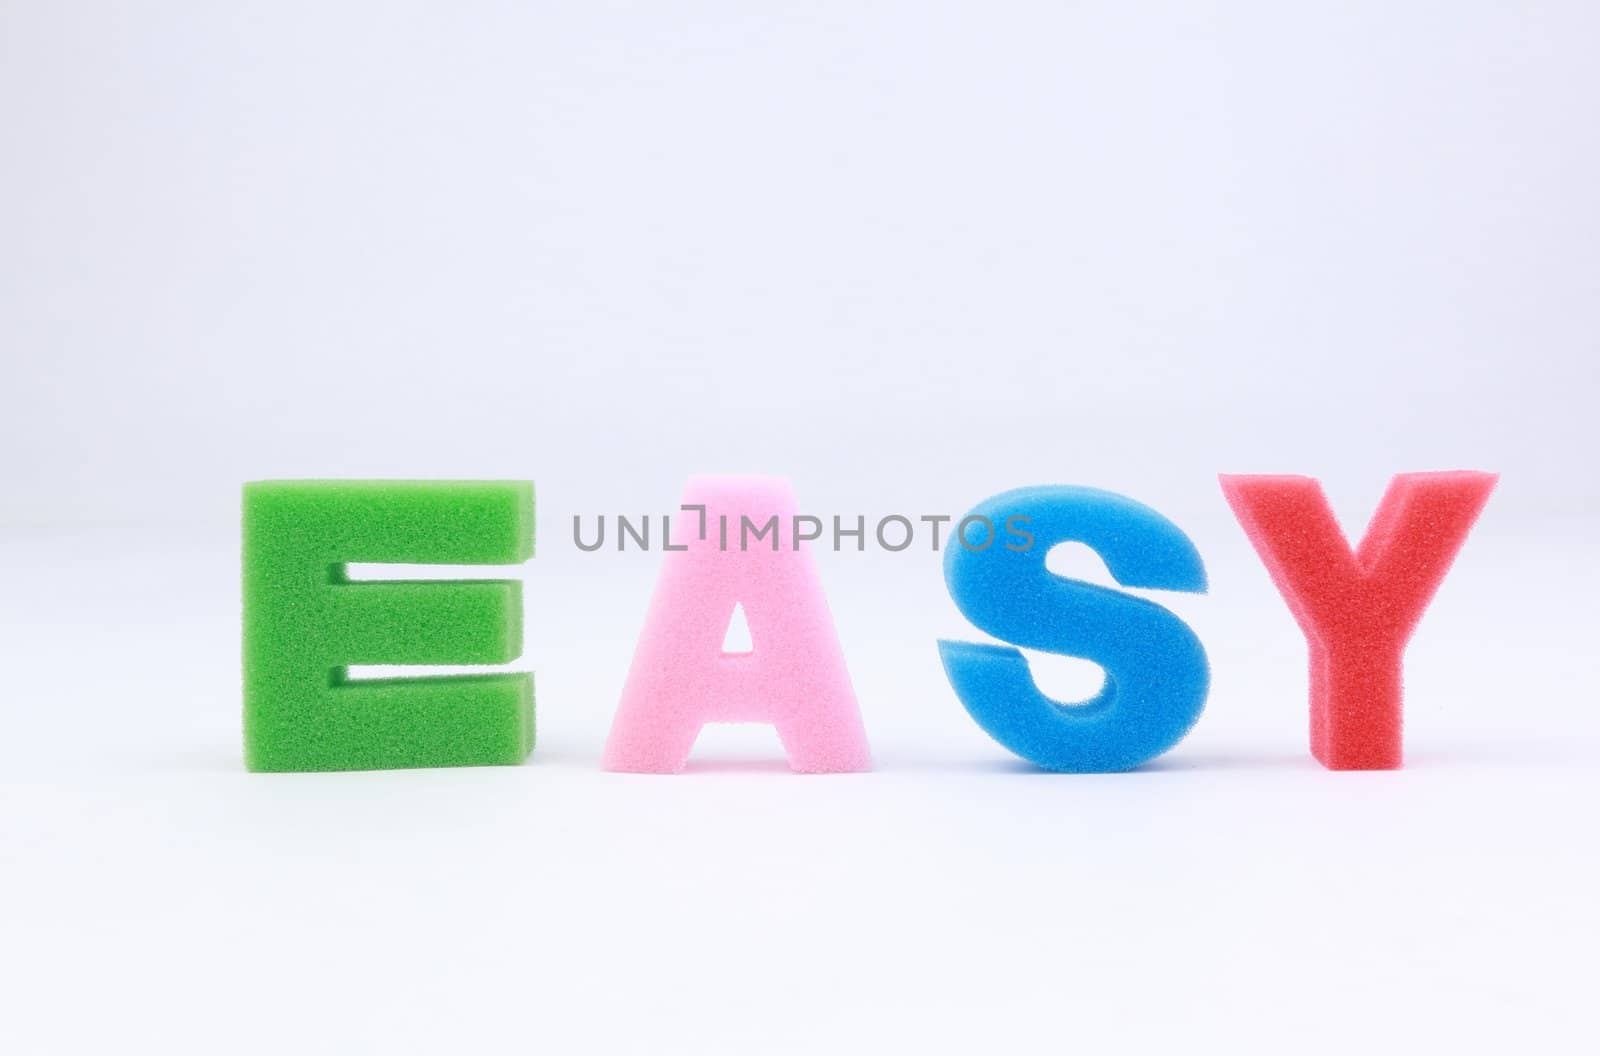 Easy word spelled out on white background